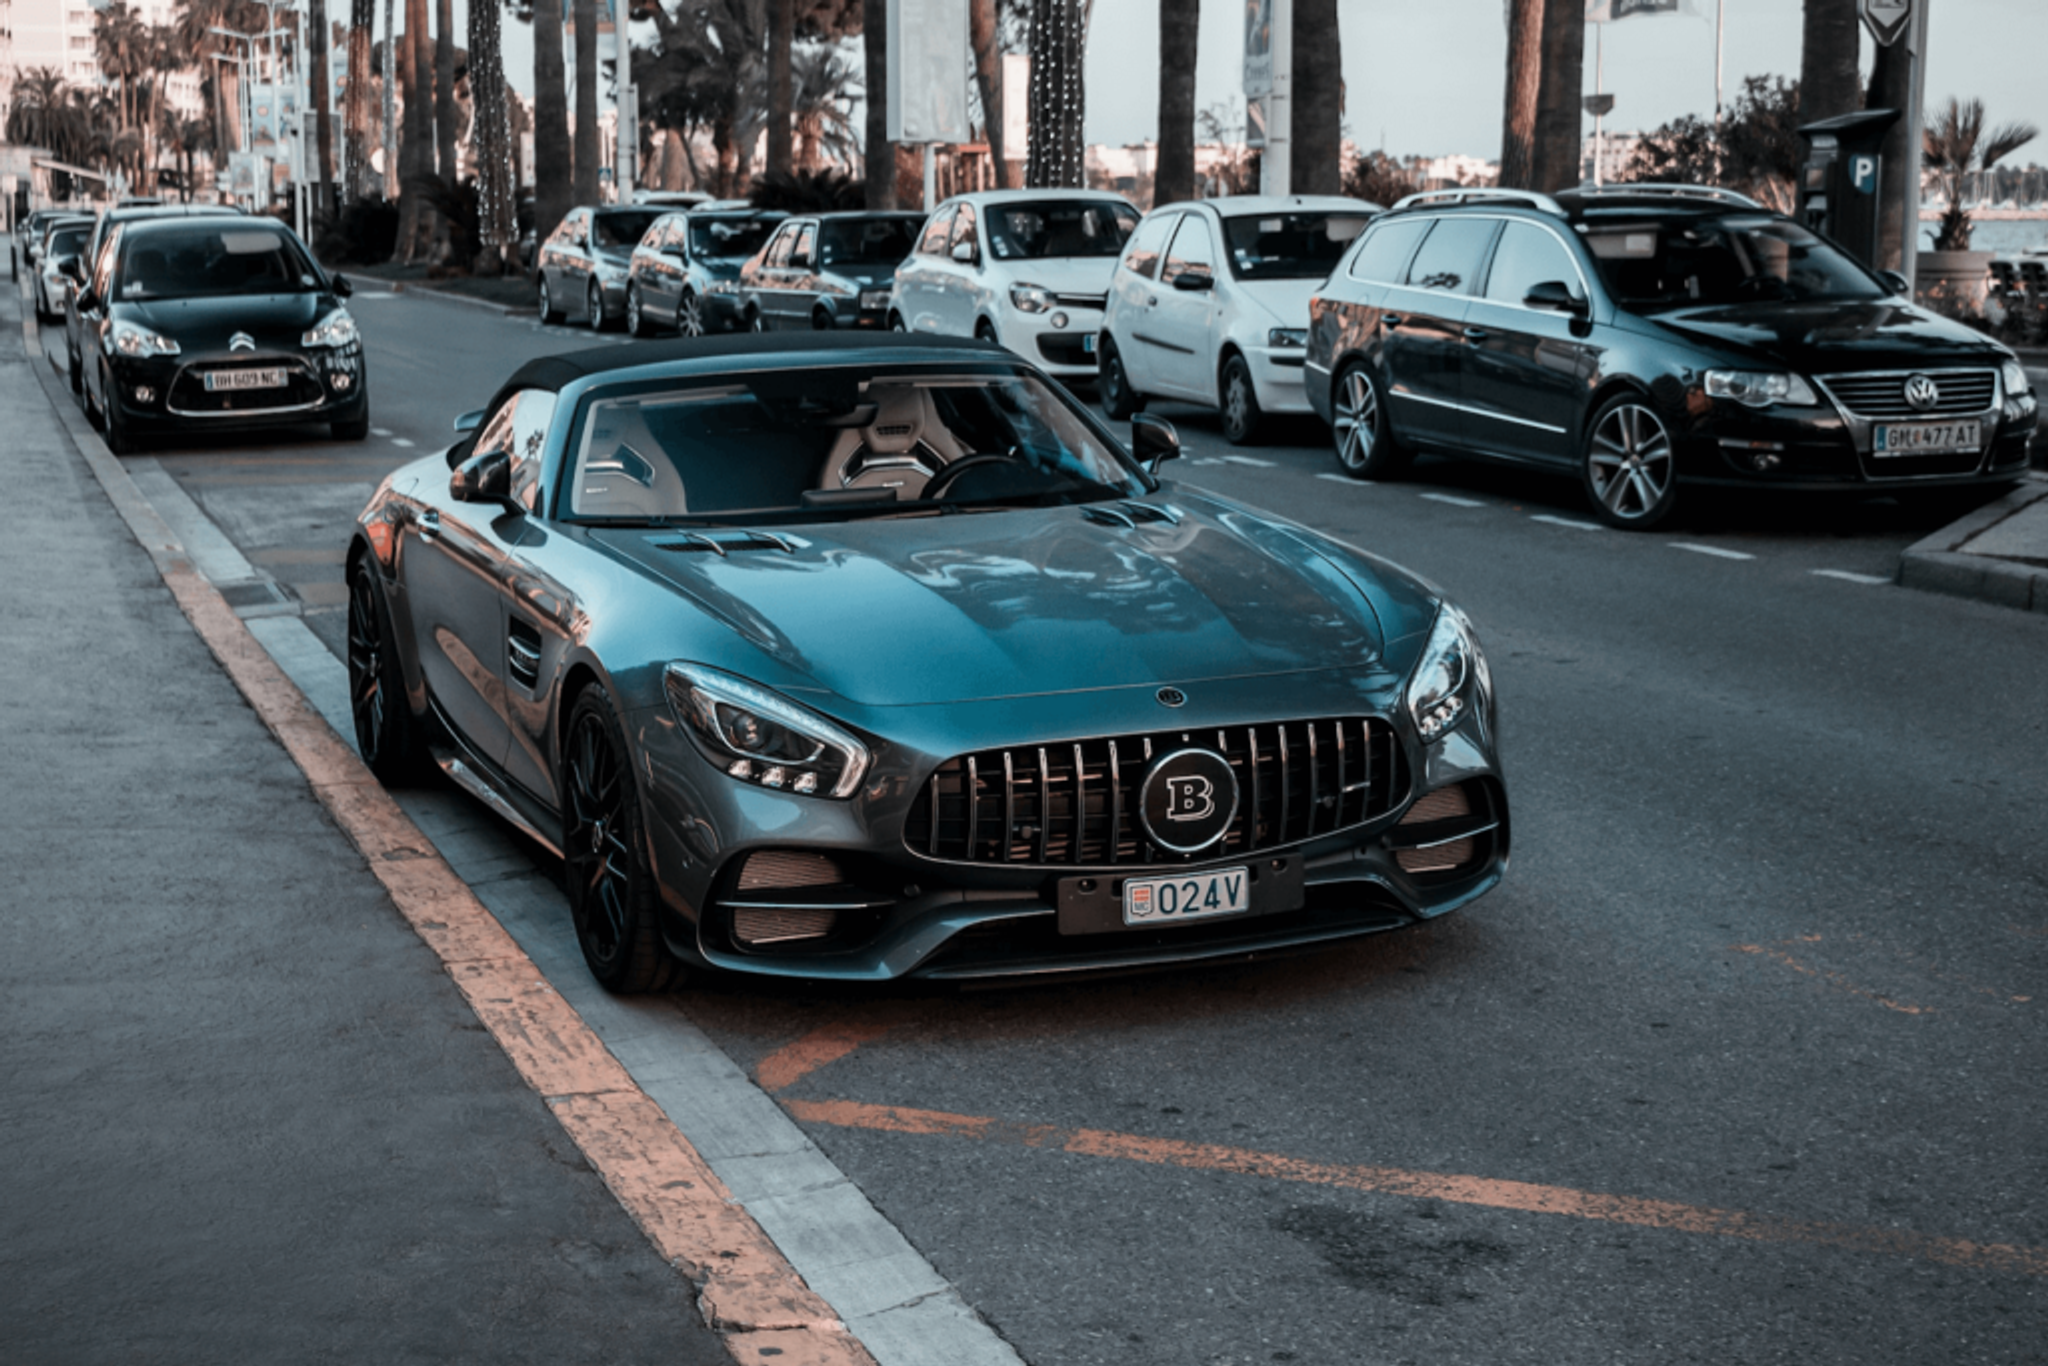 Mercedes-Benz GT cabrio with BRABUS tuning